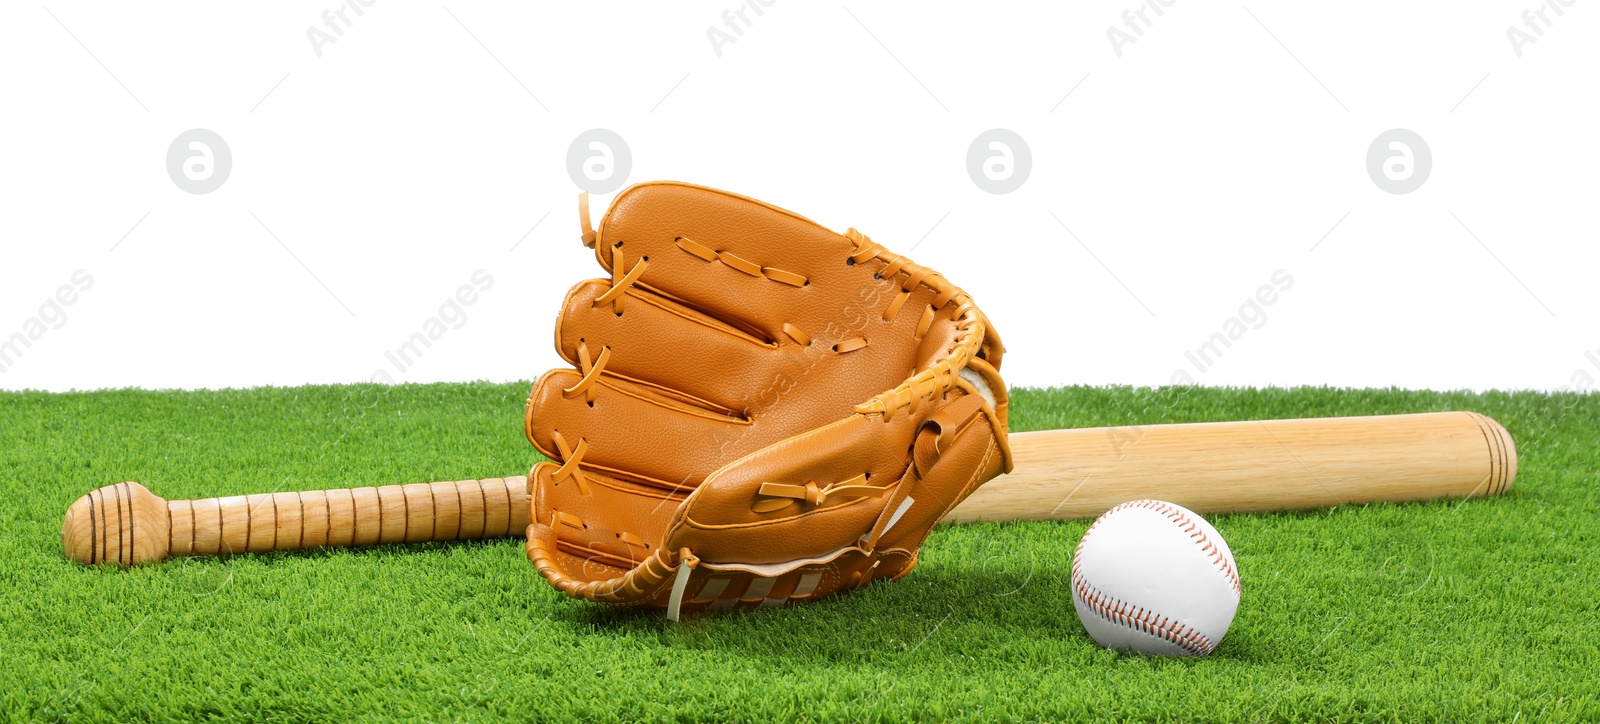 Photo of Baseball bat, ball and catcher's mitt on artificial grass against white background